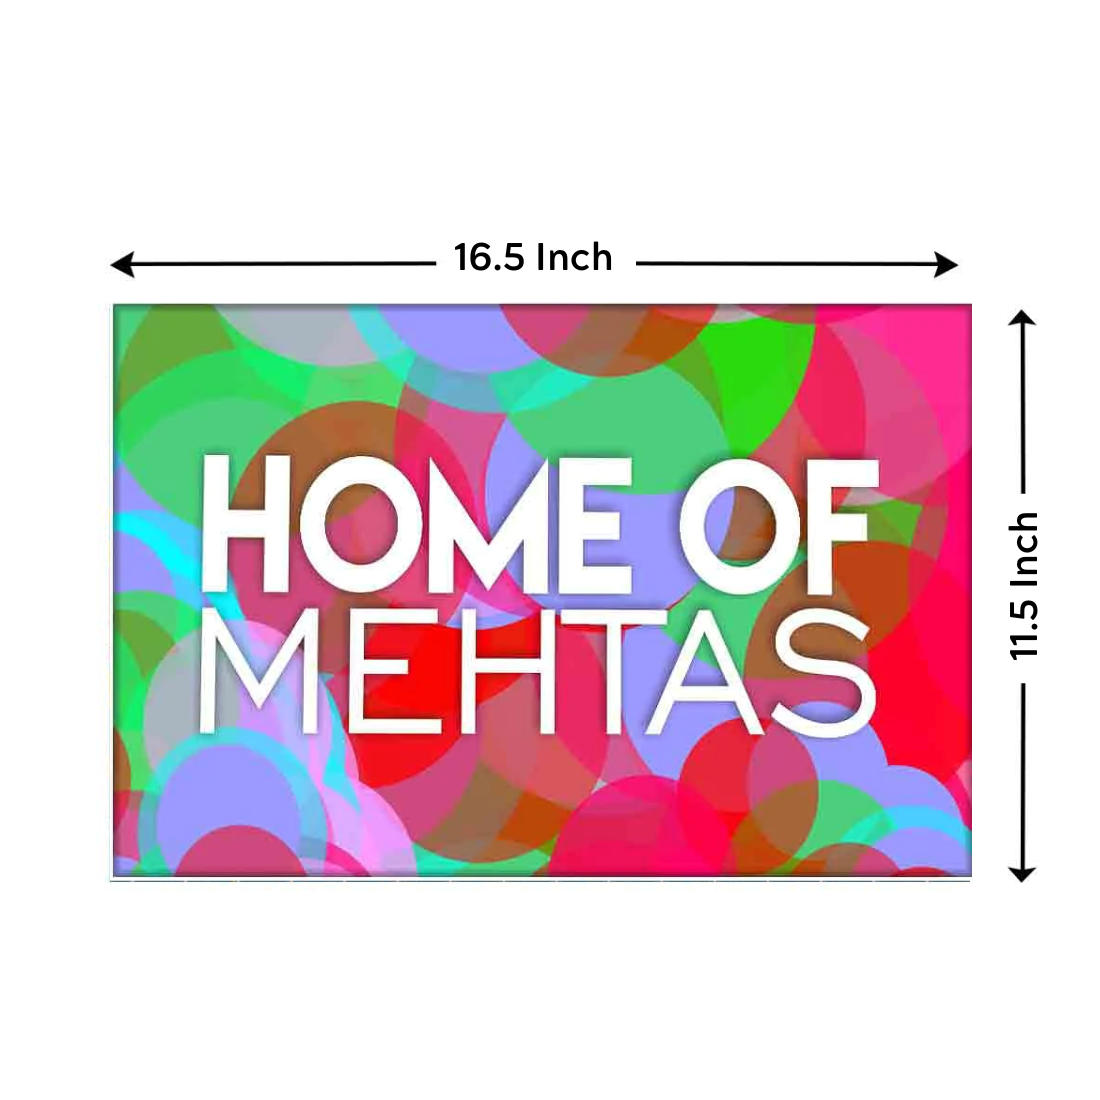 Customized Door Name Plates for Home - Multicolored